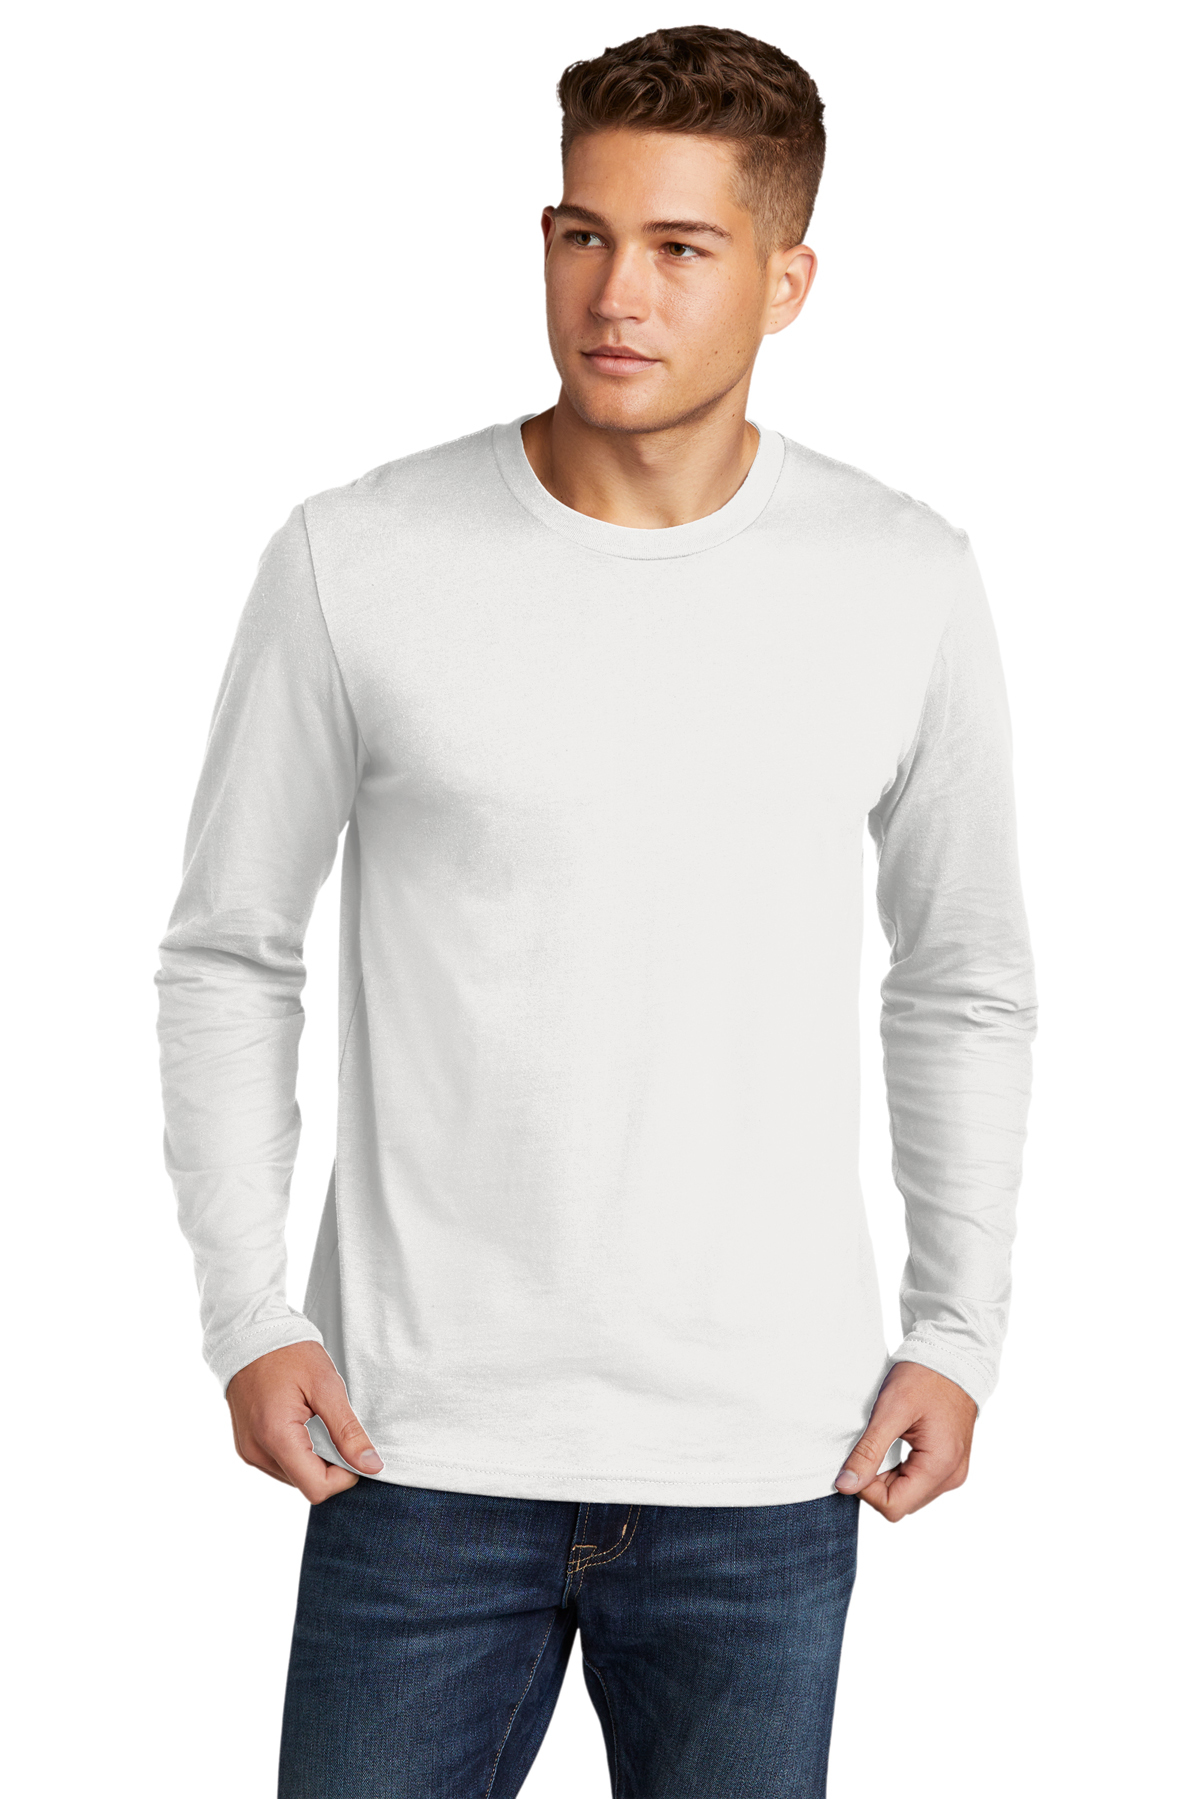 Next Level Apparel Cotton Long Sleeve Tee, Product